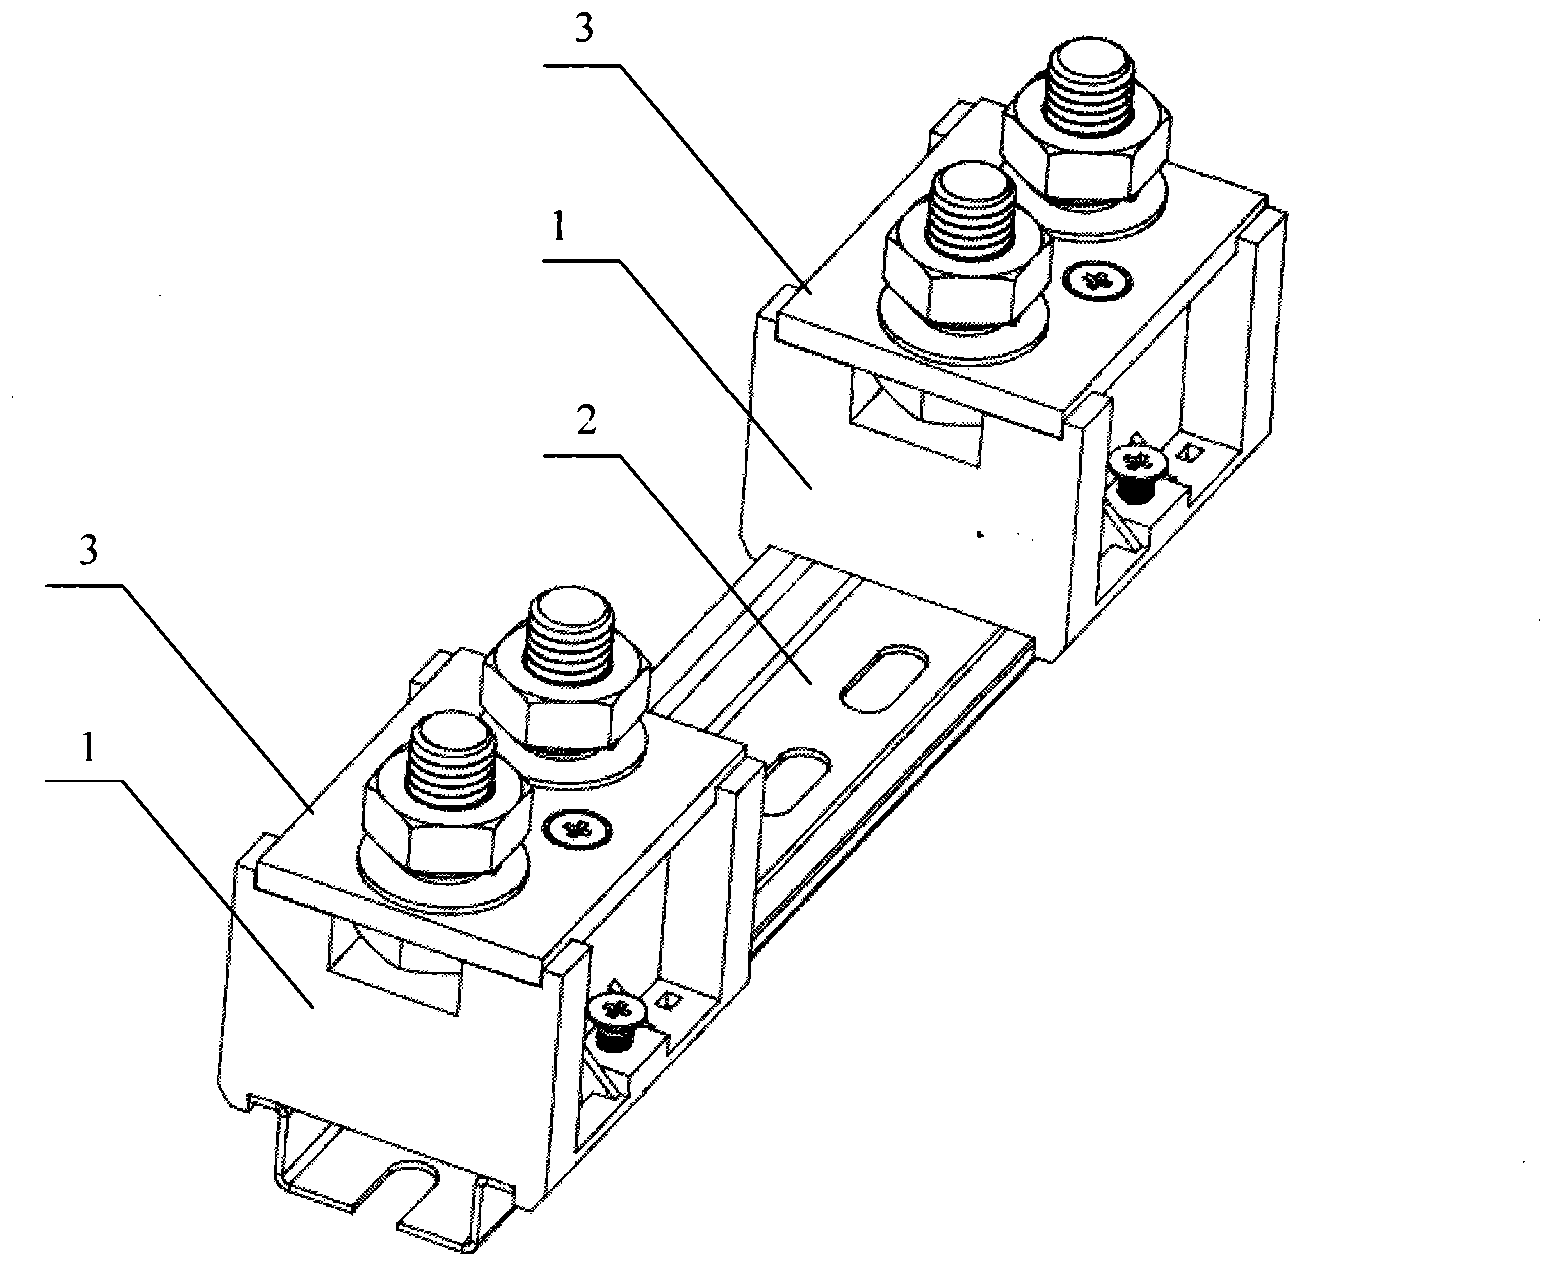 Fuse support piece (base) with DIN mobile guide rails